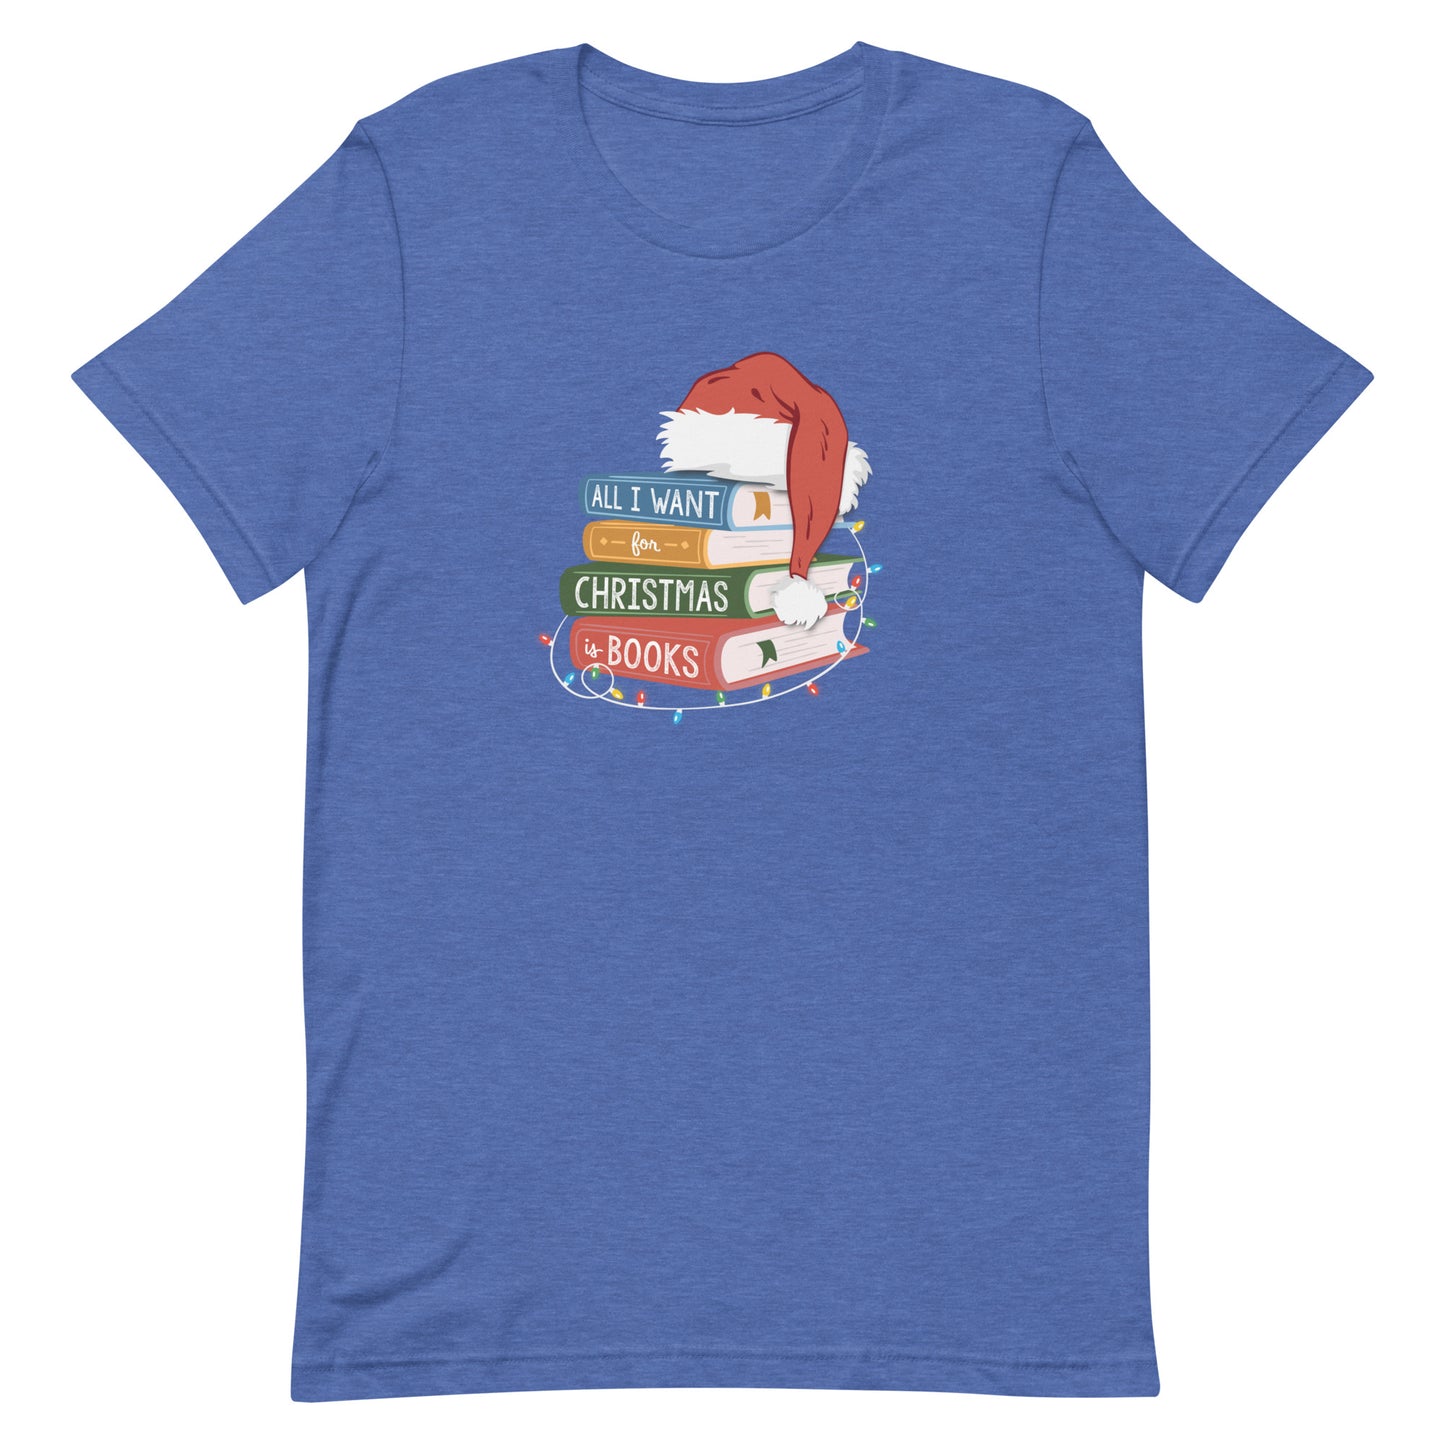 all i want for christmas is books (book stack) t-shirt